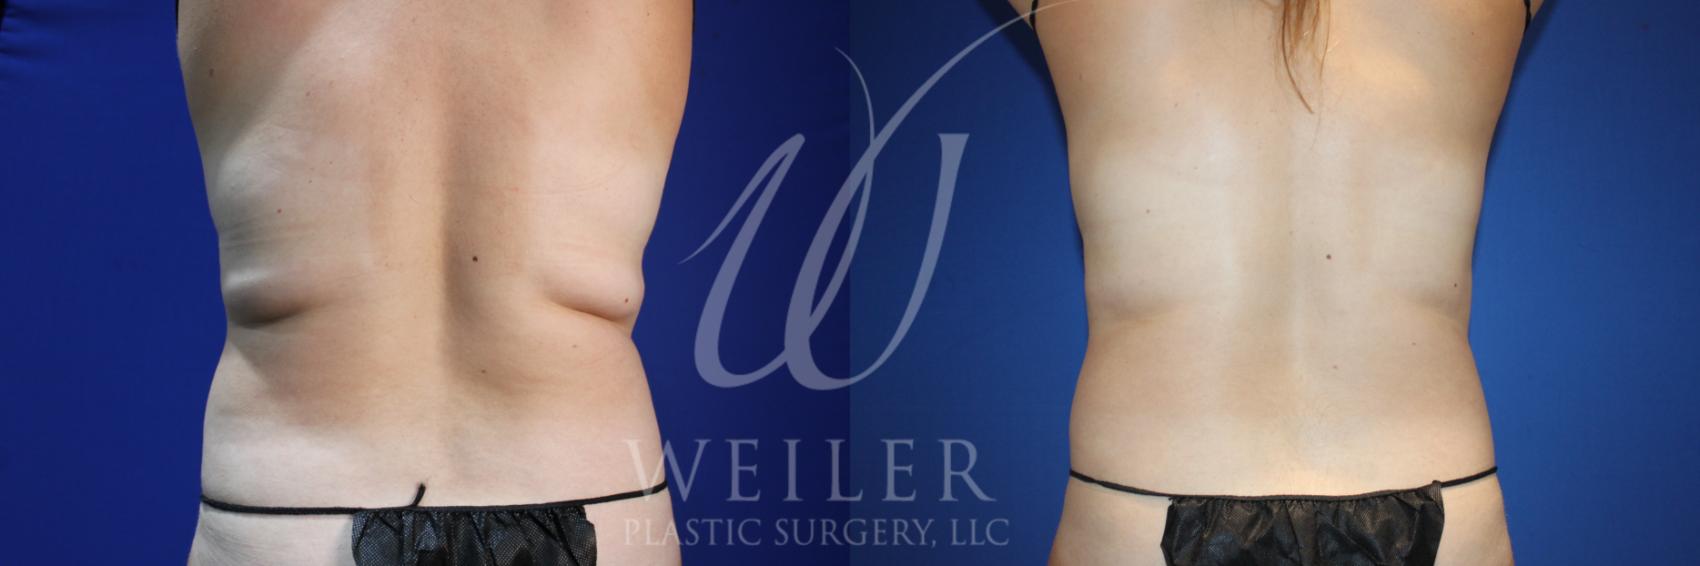 Before & After CoolSculpting Case 1008 Back View in Baton Rouge, Louisiana